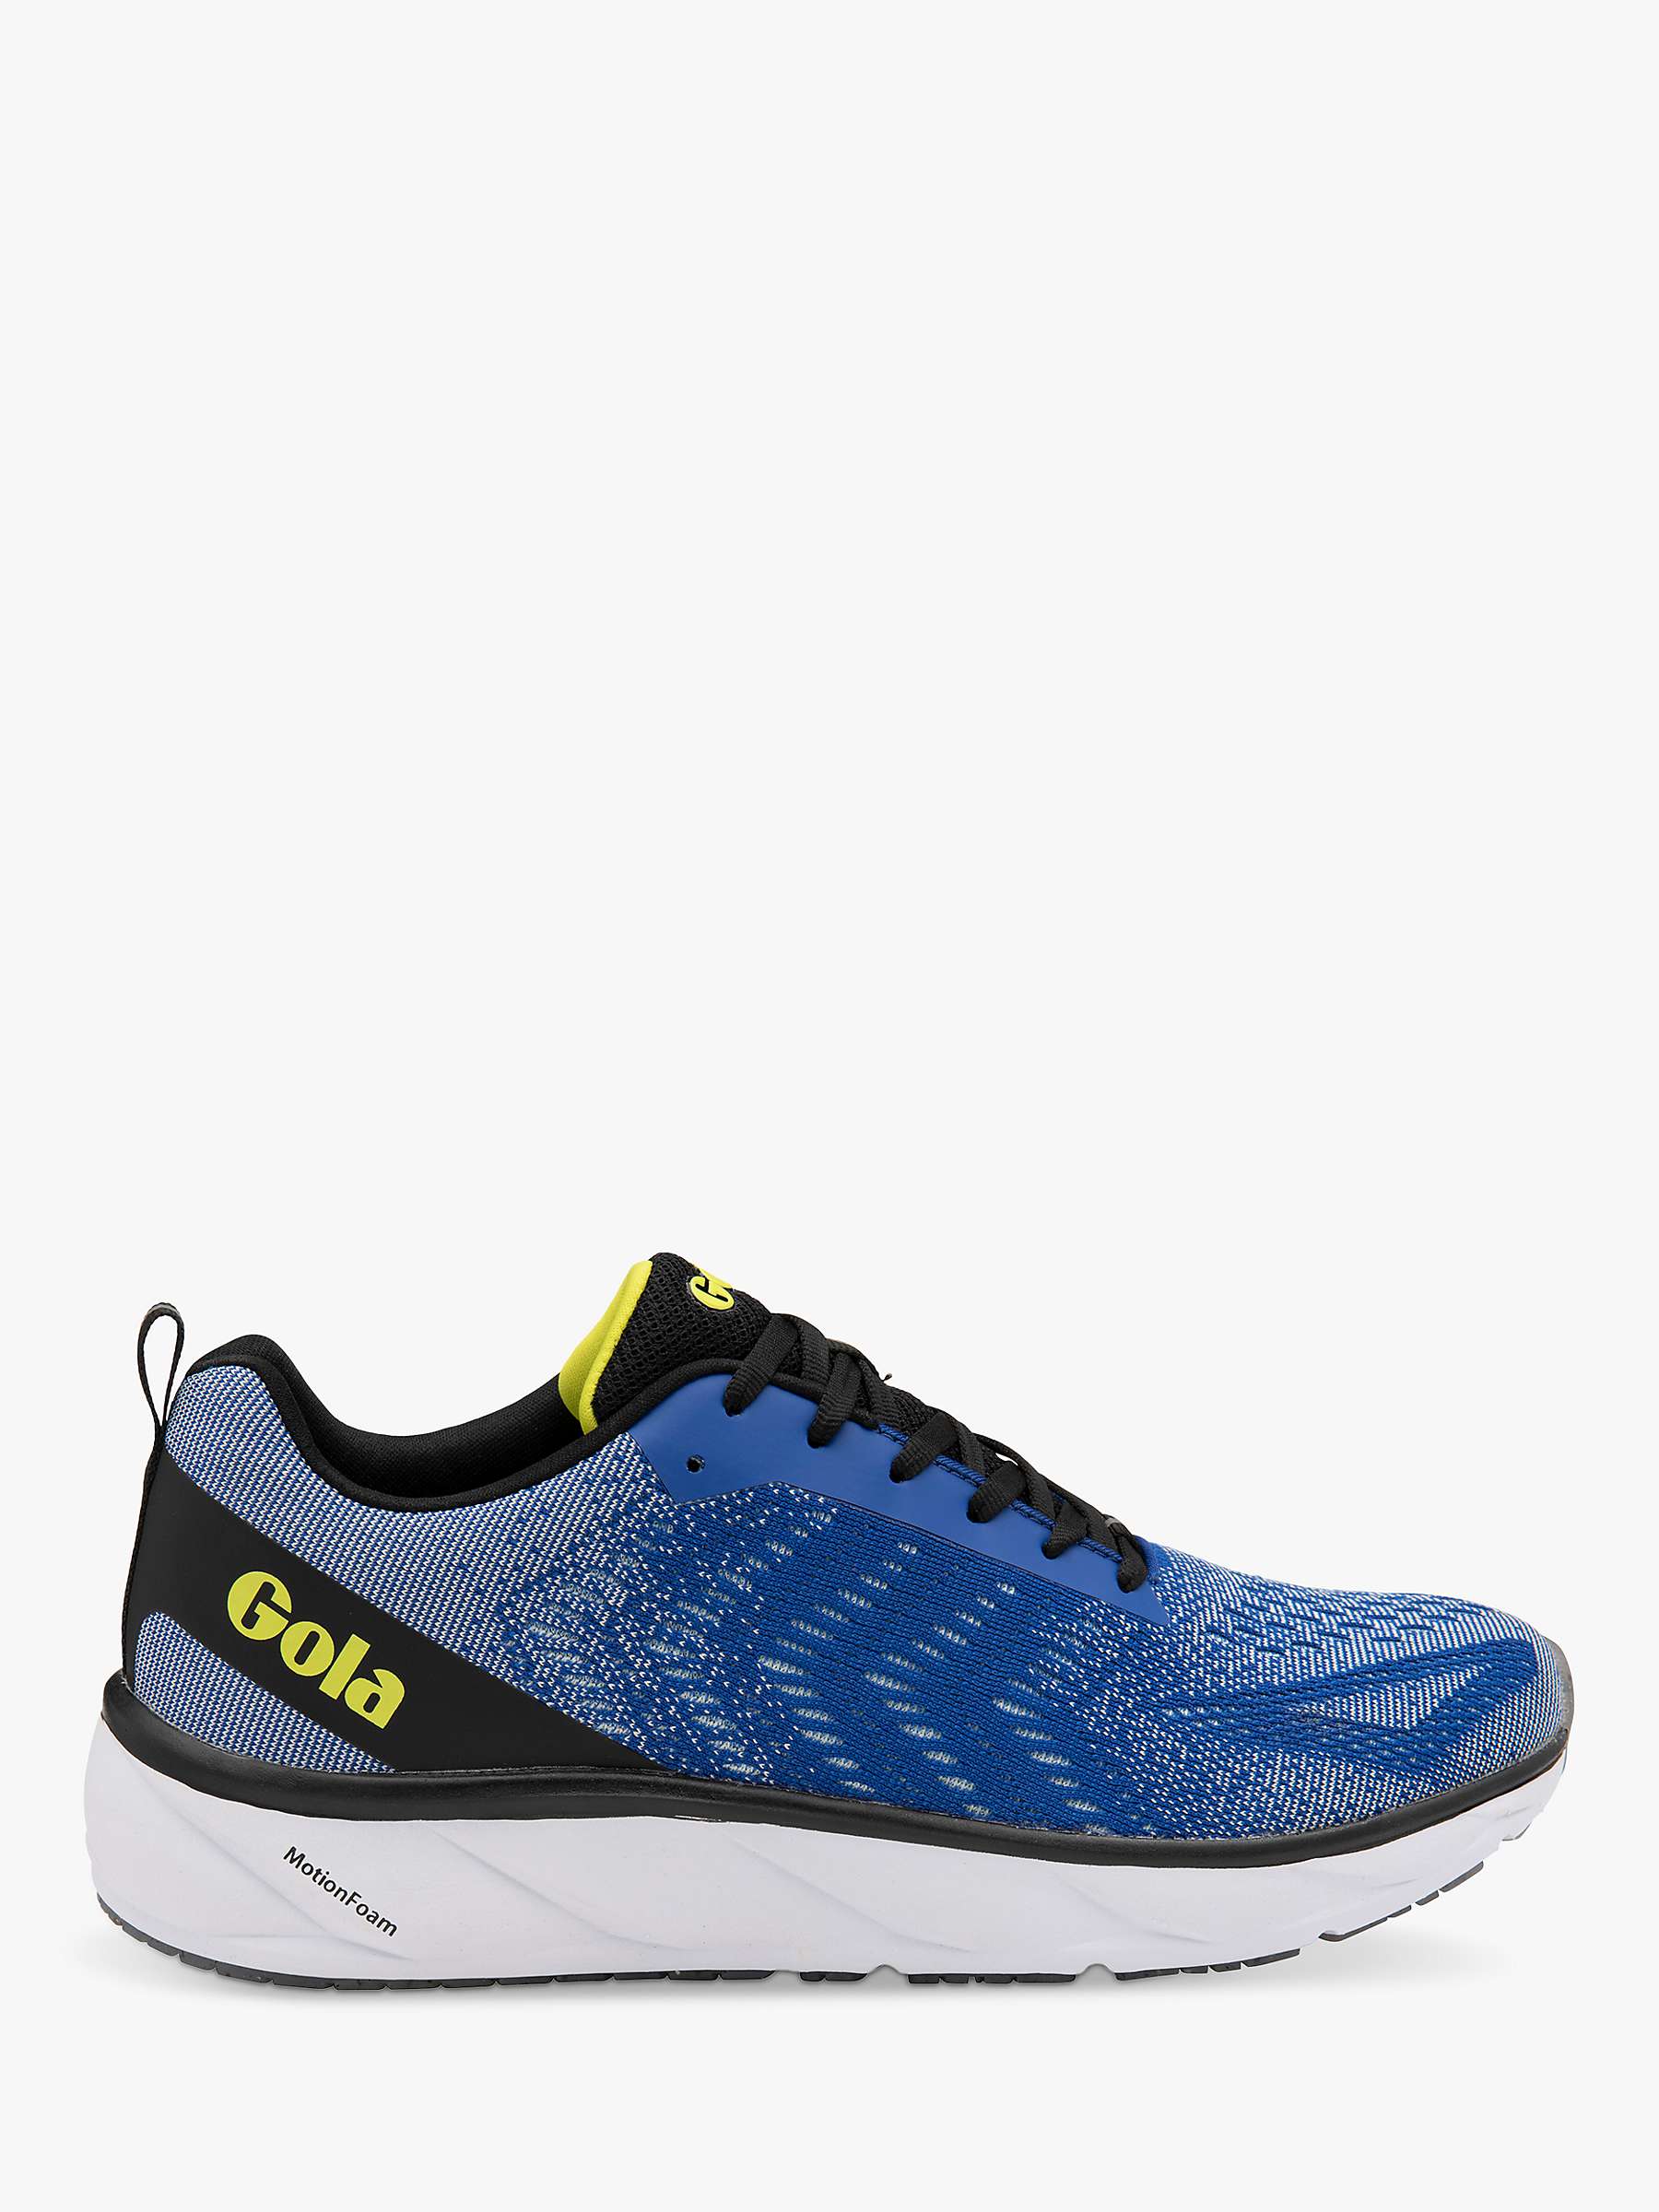 Buy Gola Performance Ultra Speed 2 Running Trainers, Blue/Volt/Black Online at johnlewis.com